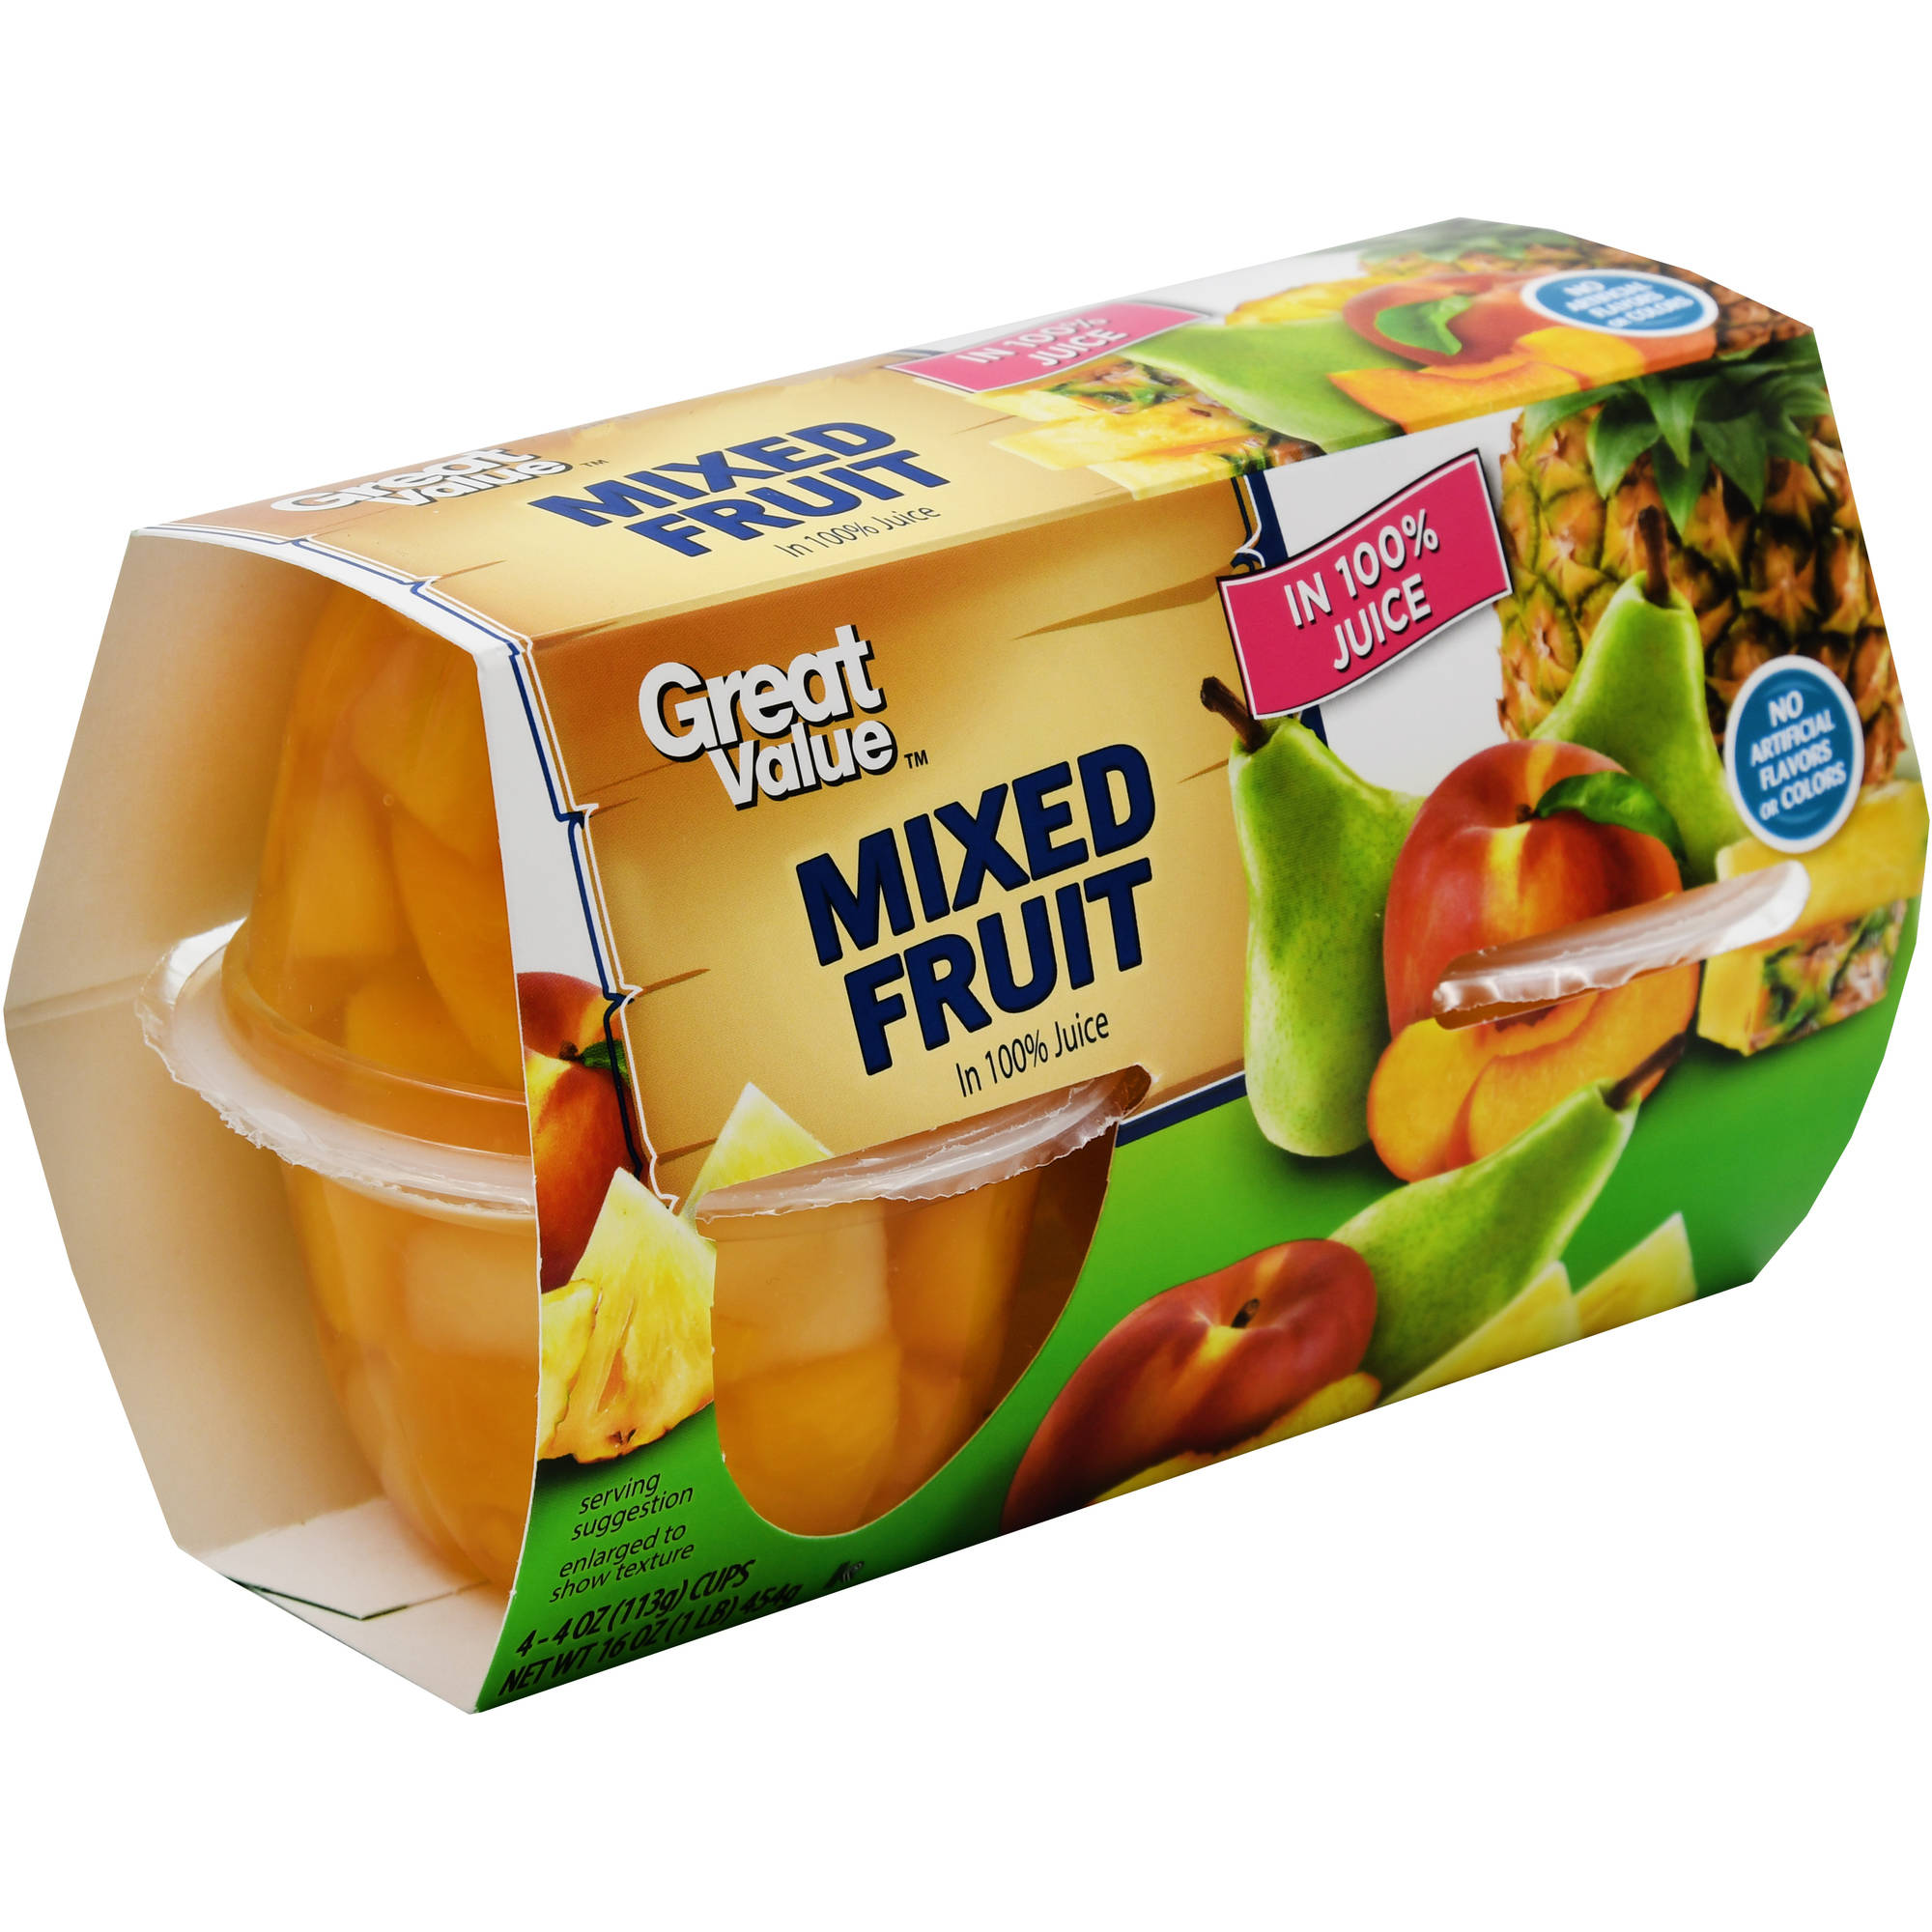 (3 Pack) Great Value Fruit Cup in 100% Juice, Mixed Fruit, 4 Oz, 4 Ct